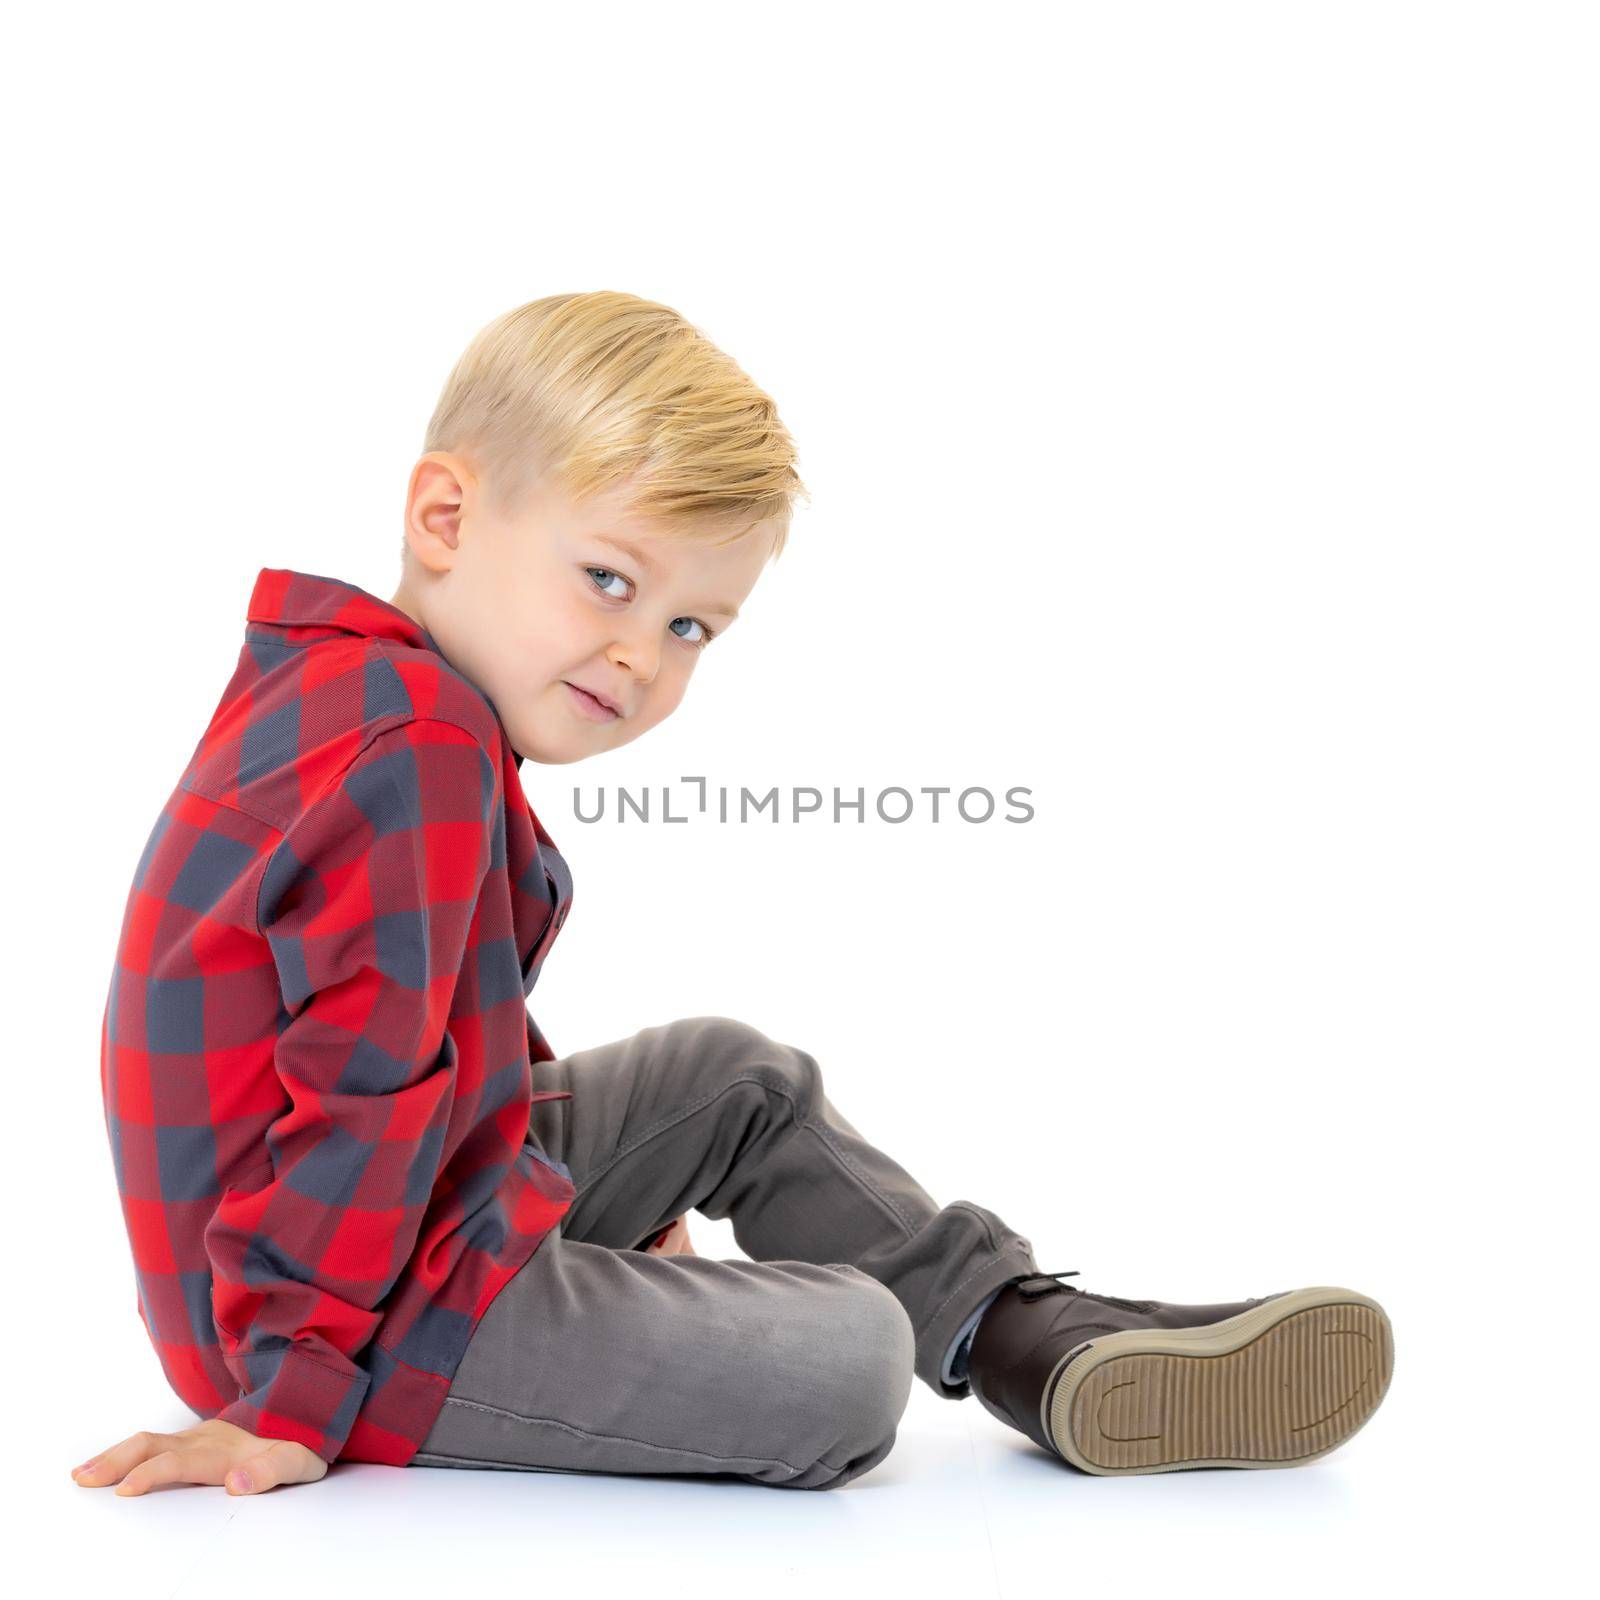 Cute little boy is sitting on the floor on a white background. The concept of a happy childhood, the harmonious development of the child in the family. Isolated.